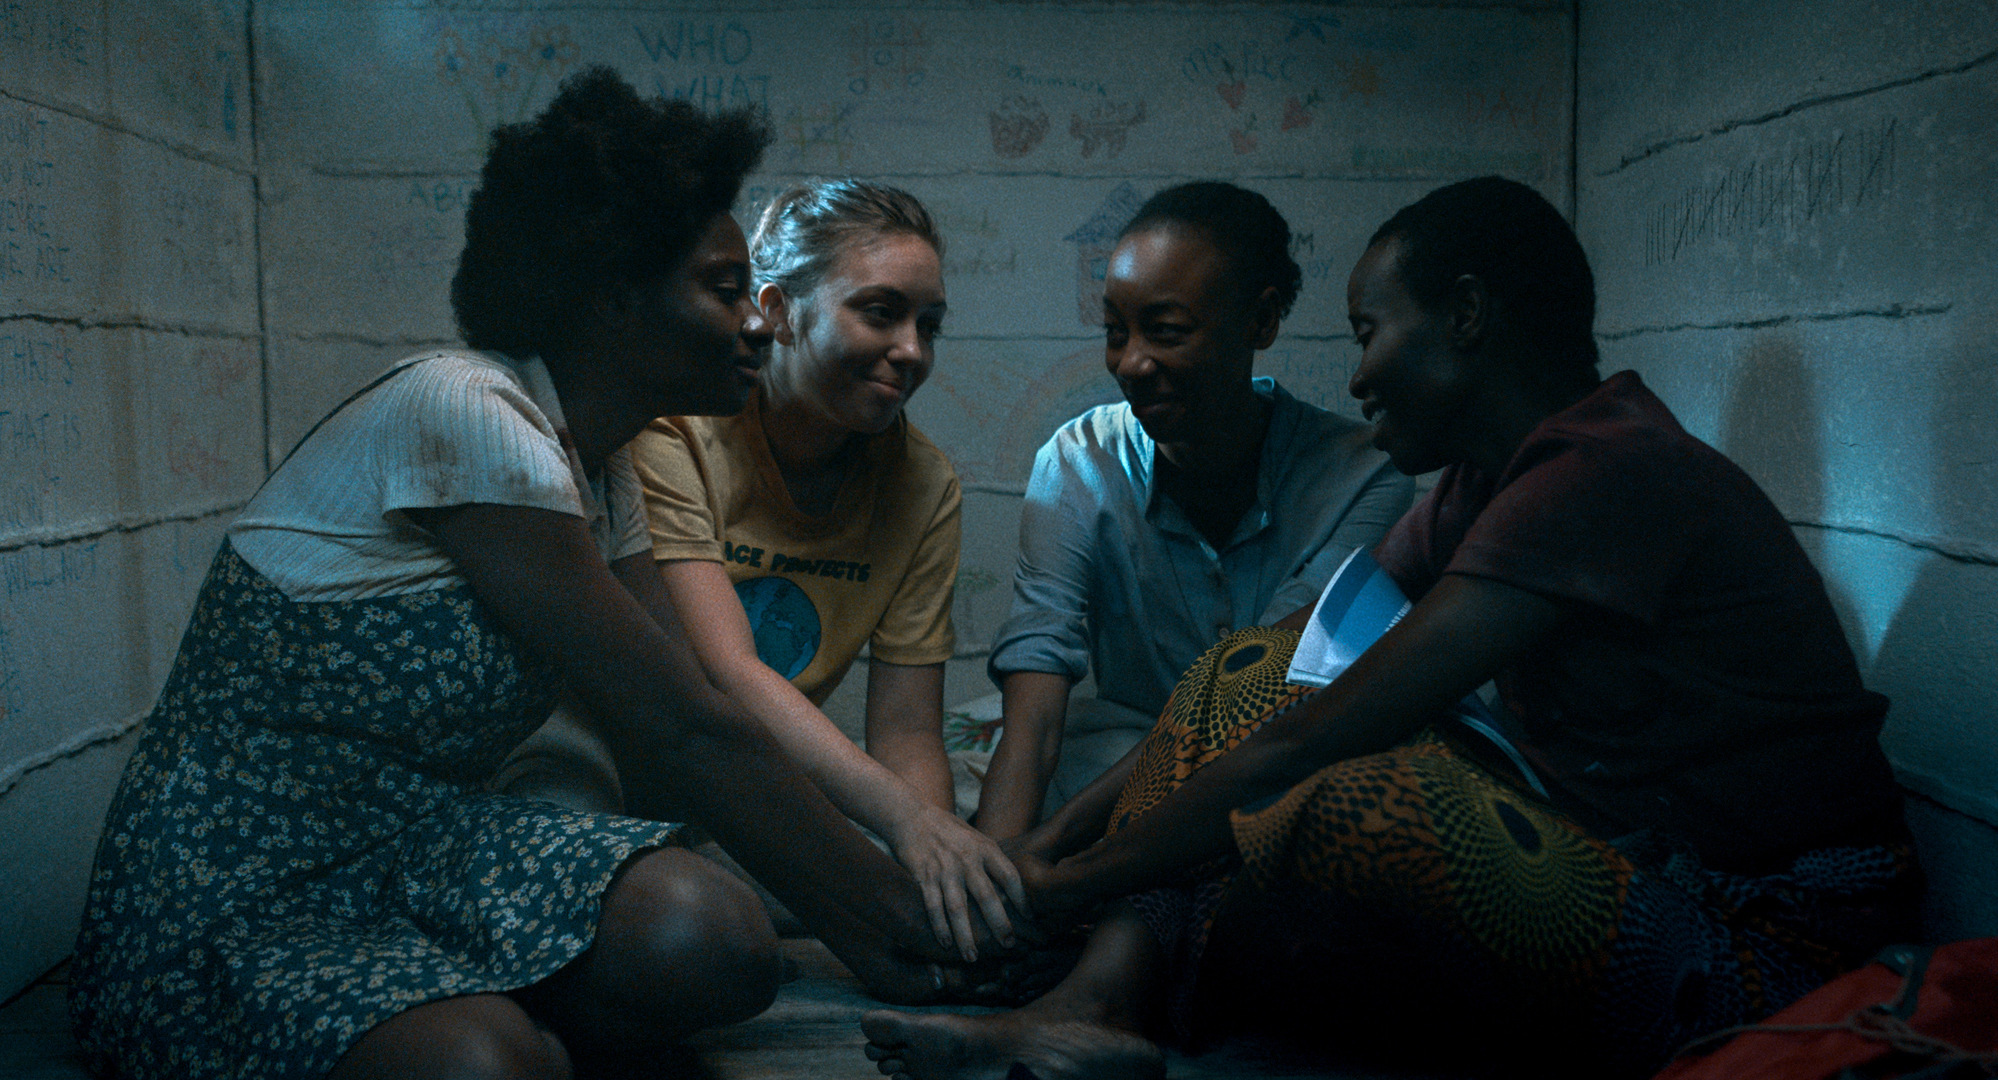 The movie depicts the life of four women in hiding during the 1994 Genocide against the Tutsi in Rwanda. Net photo